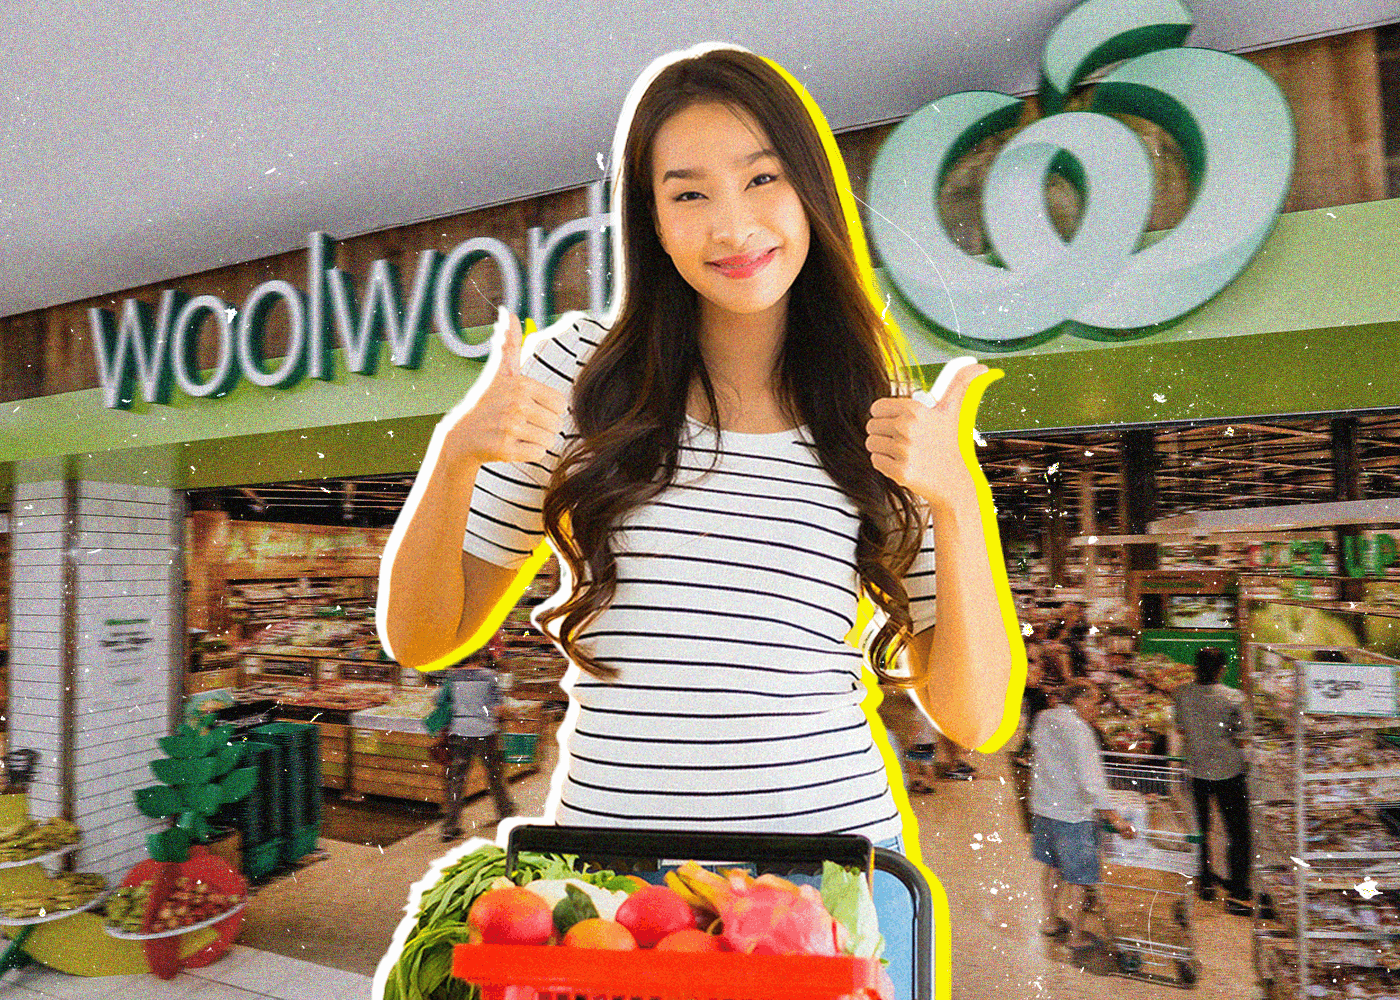 A Successful Influencer Campaign for Woolworths